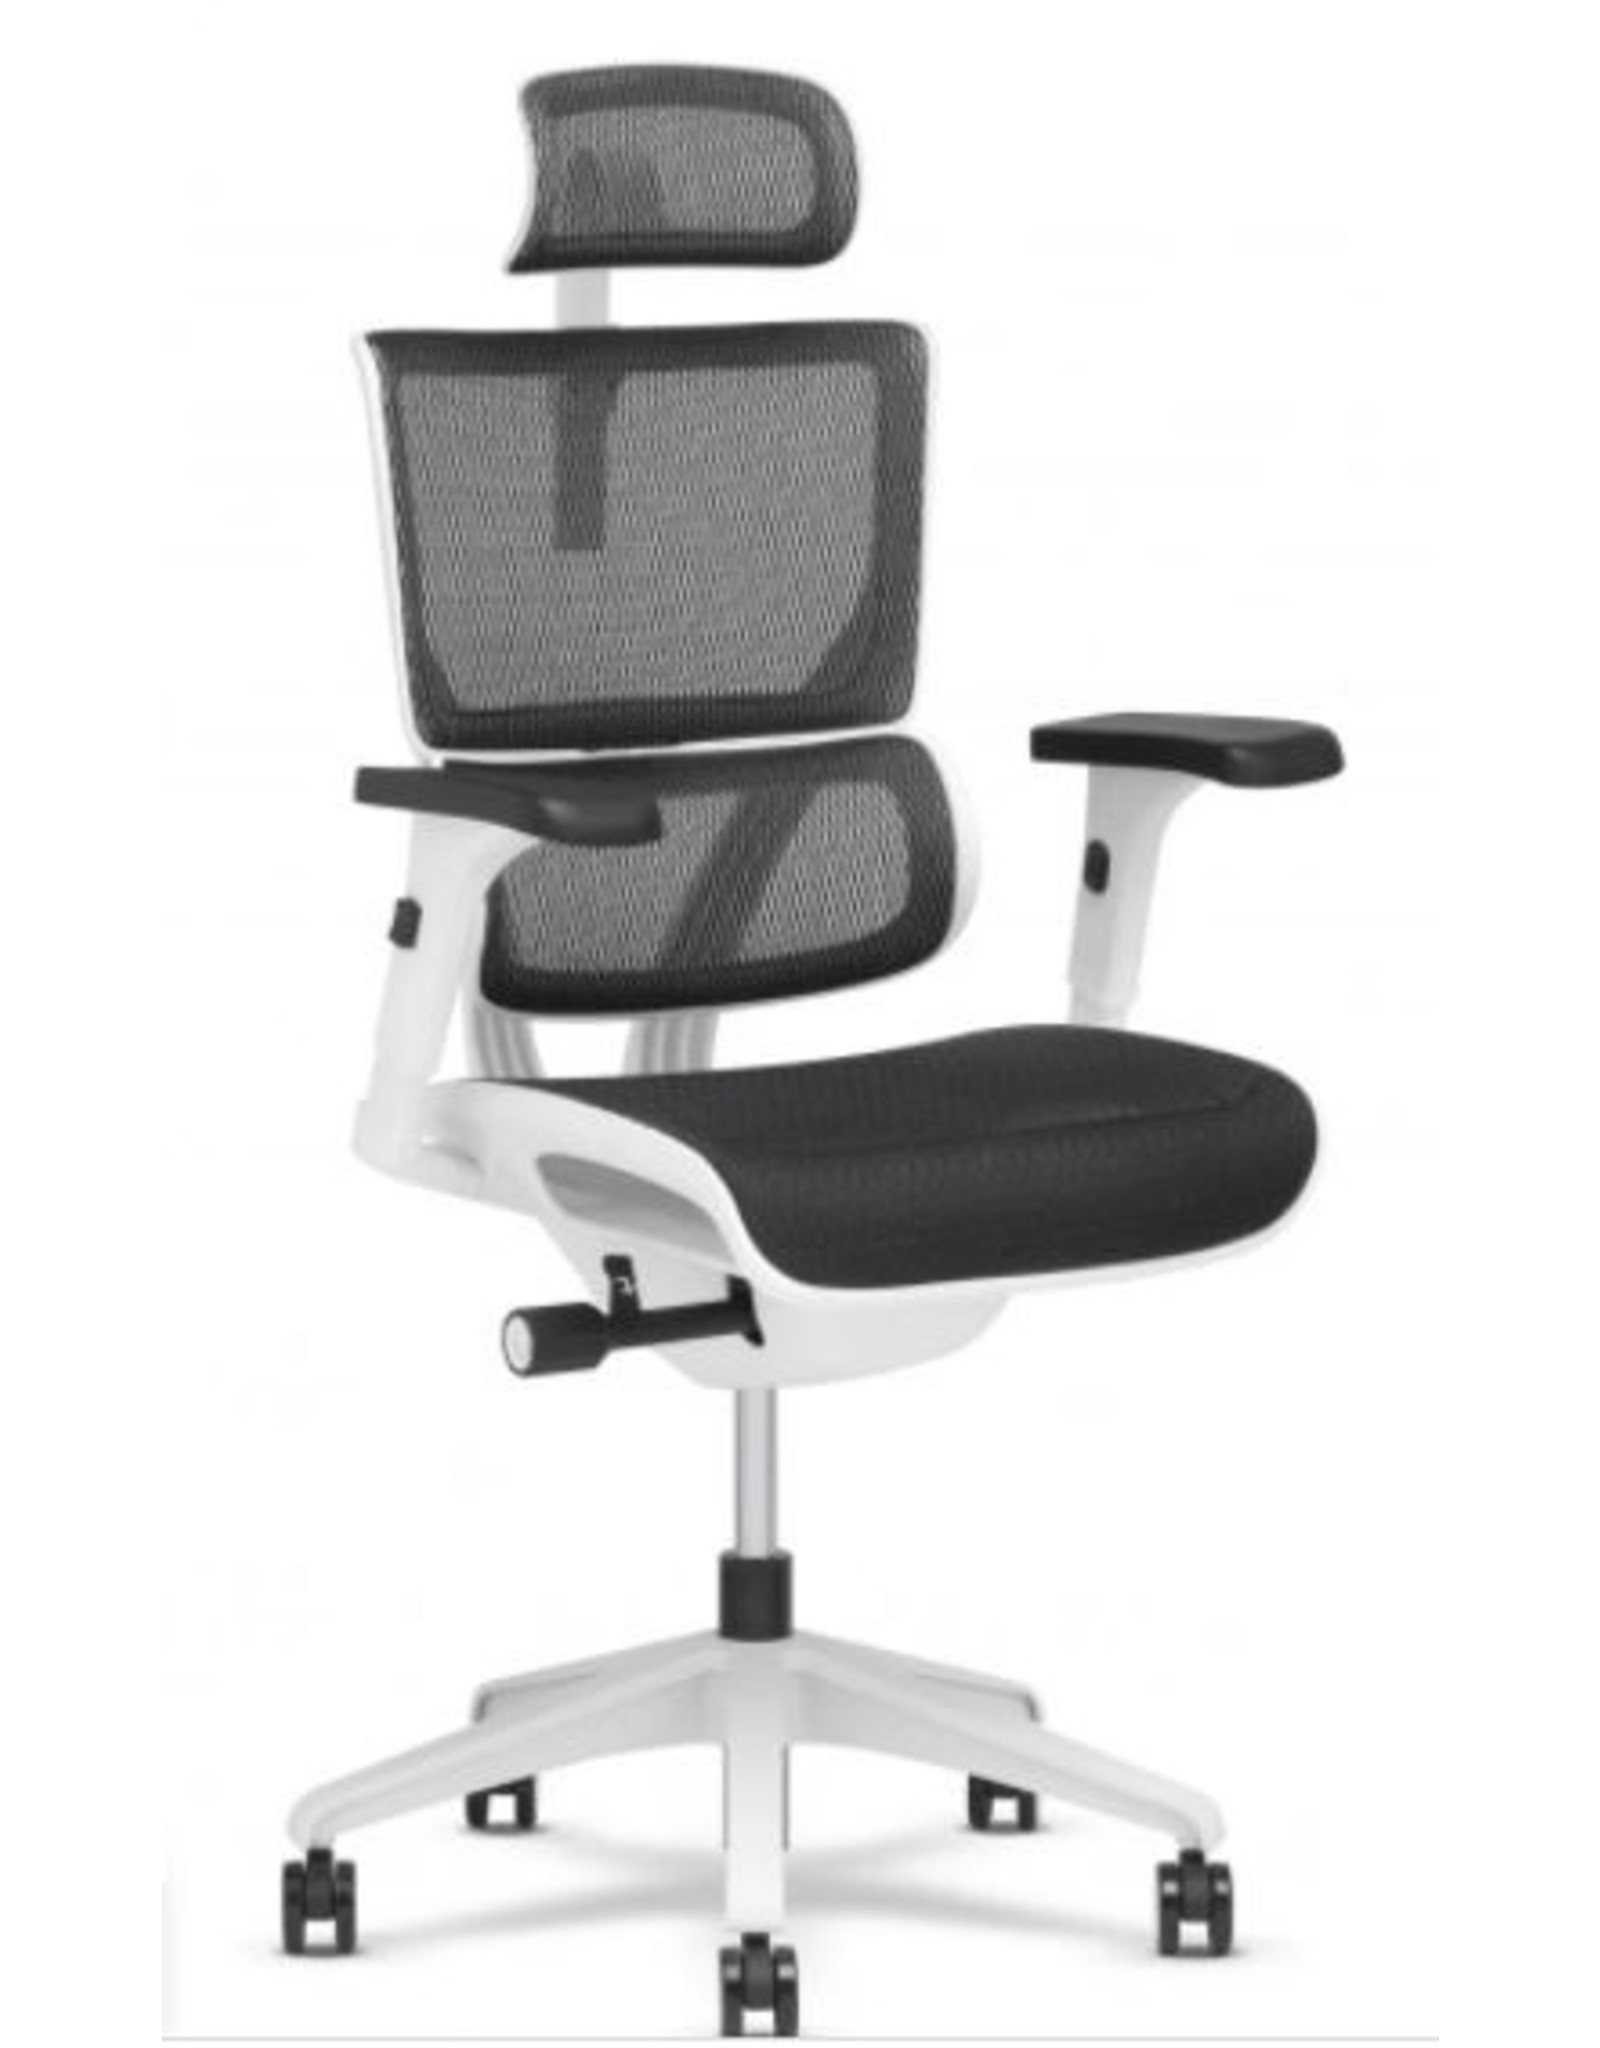 XCHAIR XS Vision Small Management Chair